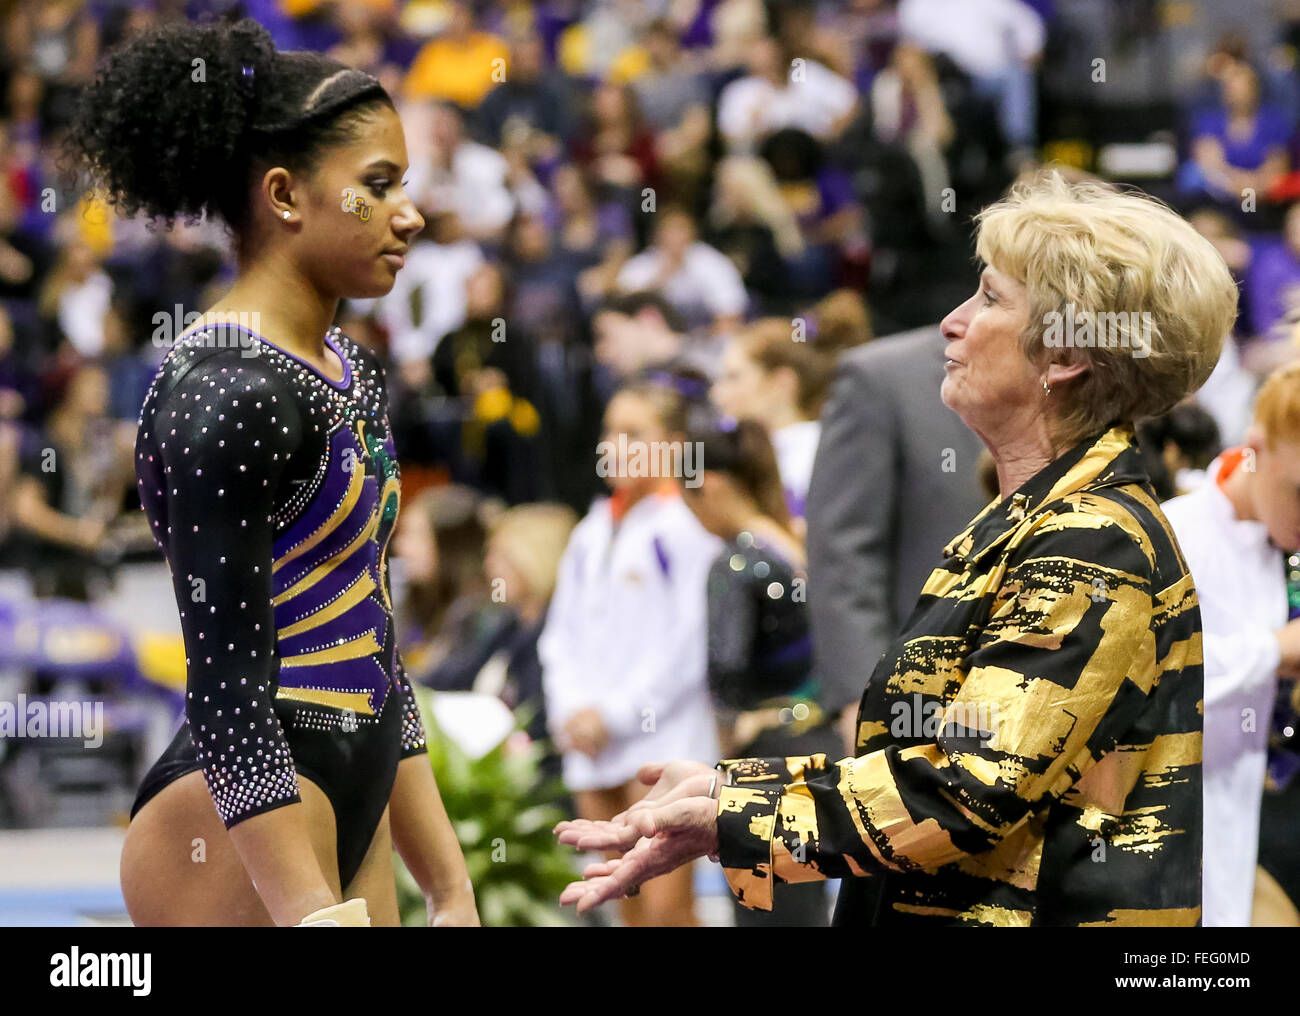 Baton Rouge, LA, USA. 05th Feb, 2016. LSU Tigers head coach D-D Breaux talks to LSU Tigers Randii Wyrick before she starts her routine during a NCAA gymnastics meet between the Arkansas Razorbacks at LSU Tigers at the Pete Maravich Assembly Center in Baton Rouge, LA. Stephen Lew/CSM/Alamy Live News Stock Photo